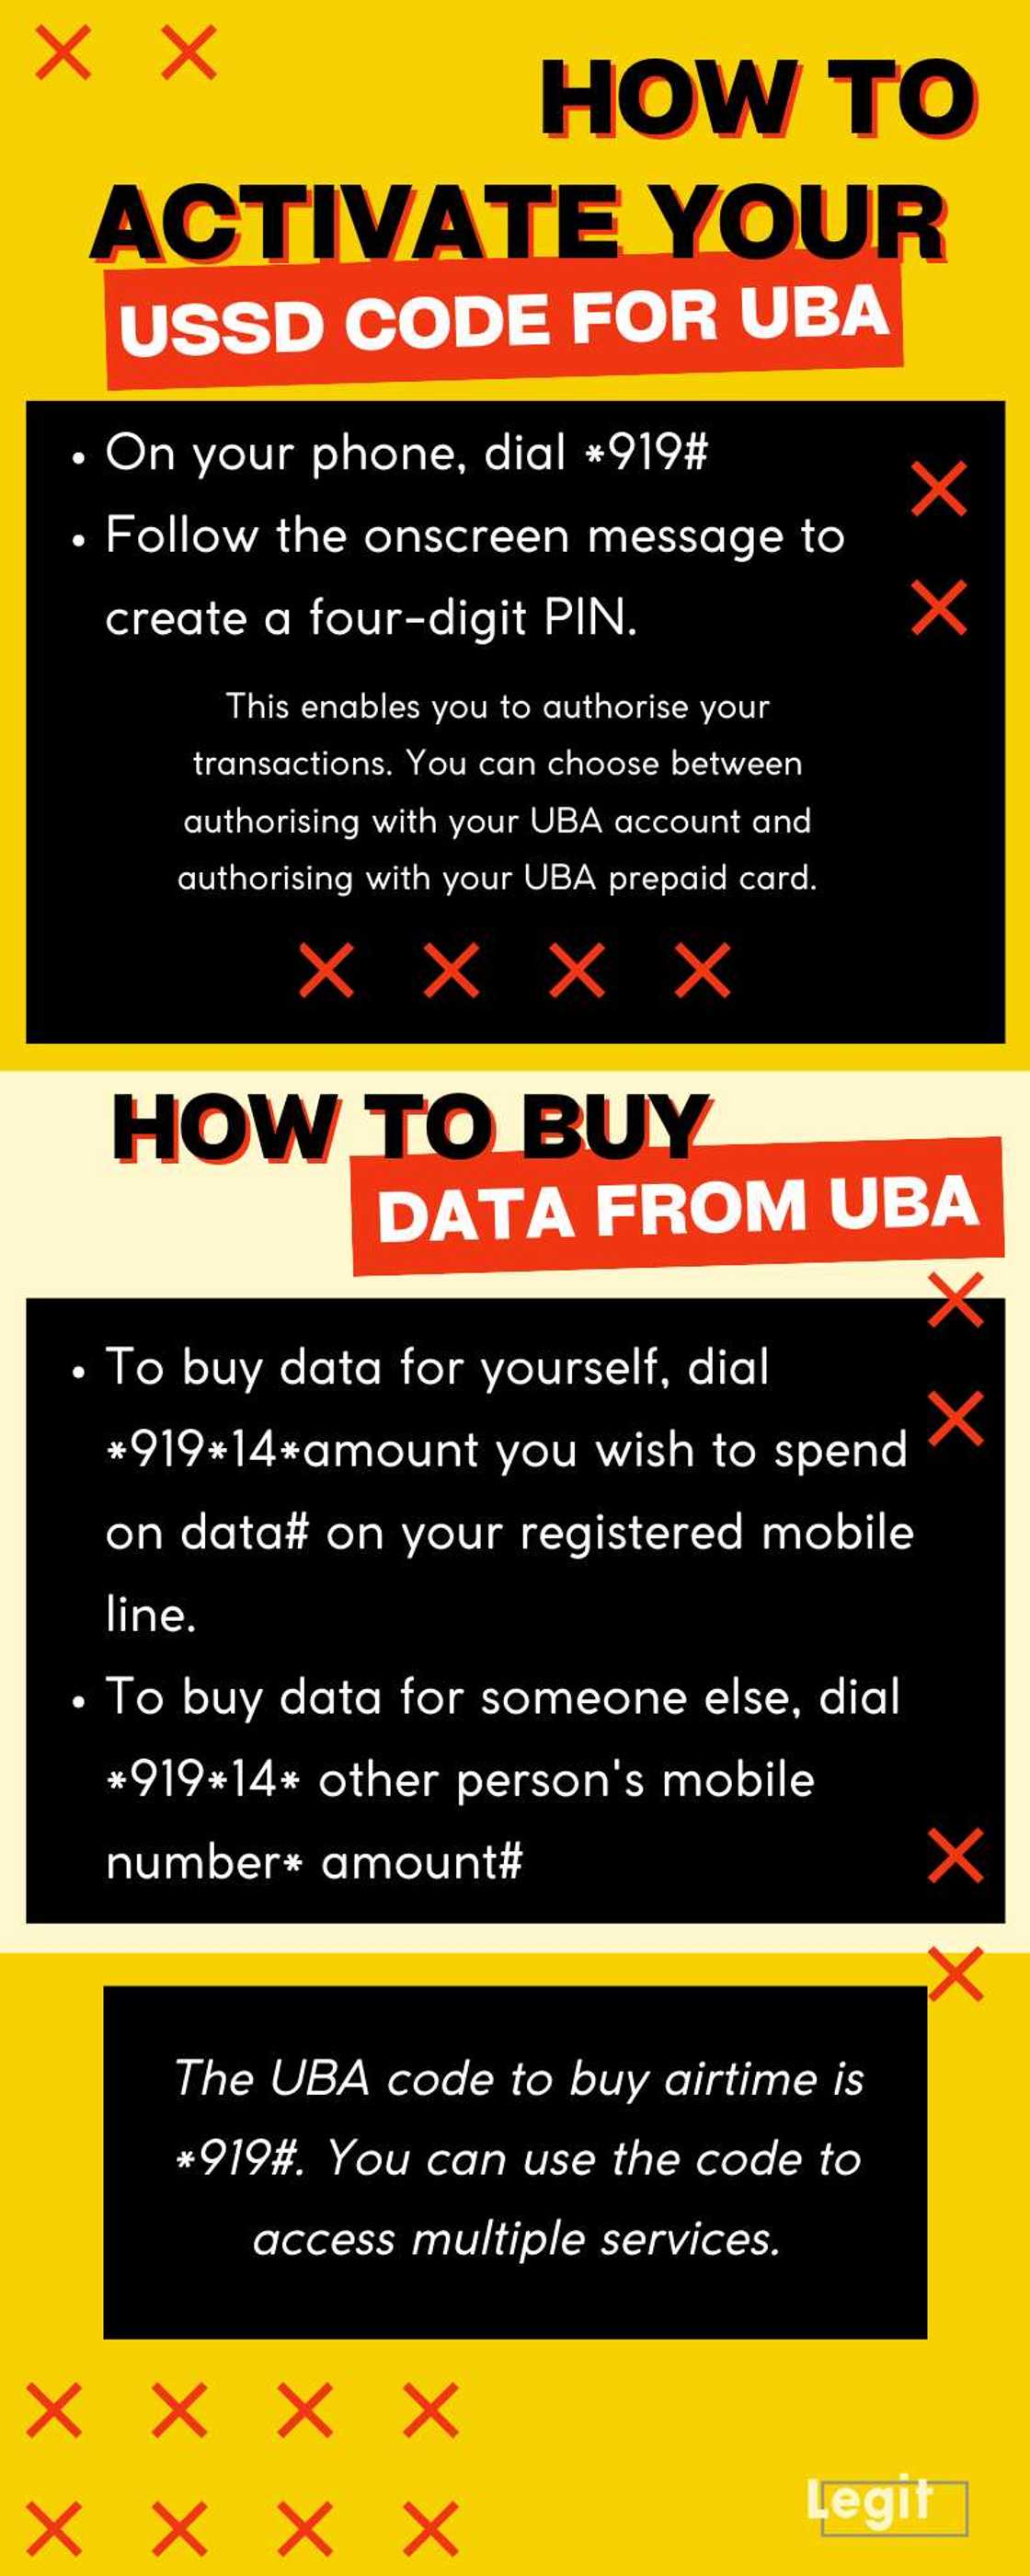 How to buy airtime from UBA